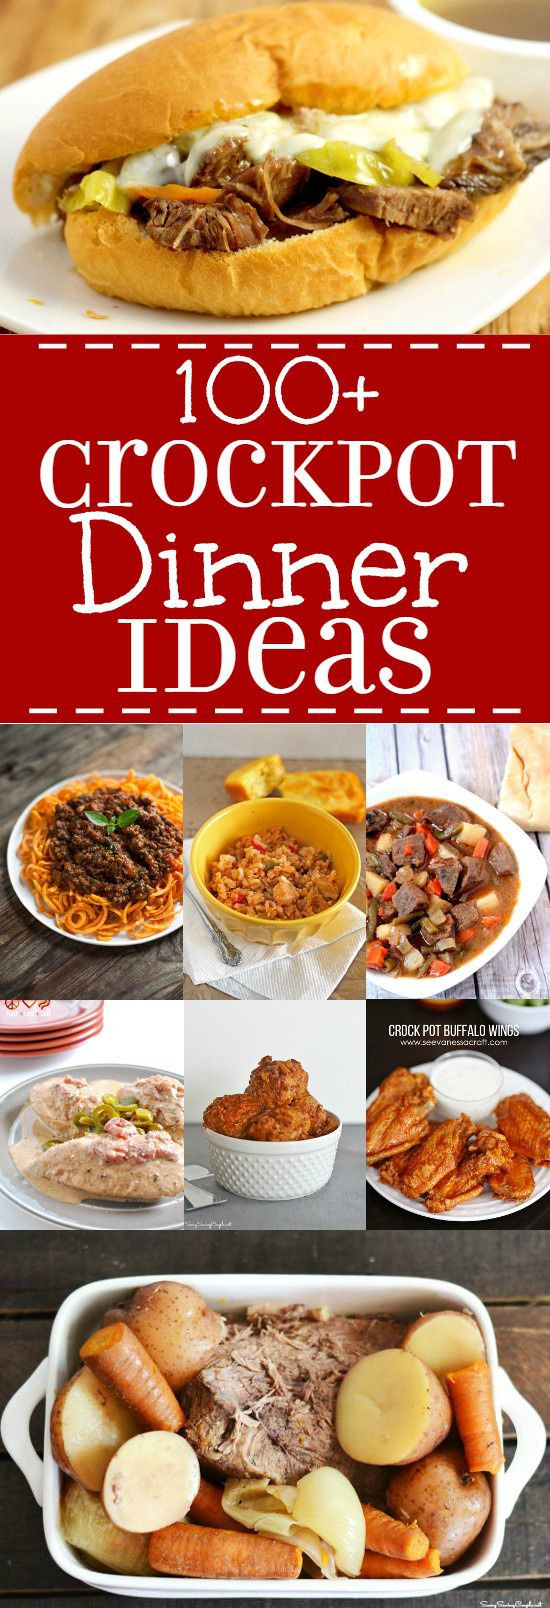 Easy Delicious Dinner Recipes
 Over 100 easy and delicious Crock Pot Dinner Ideas with